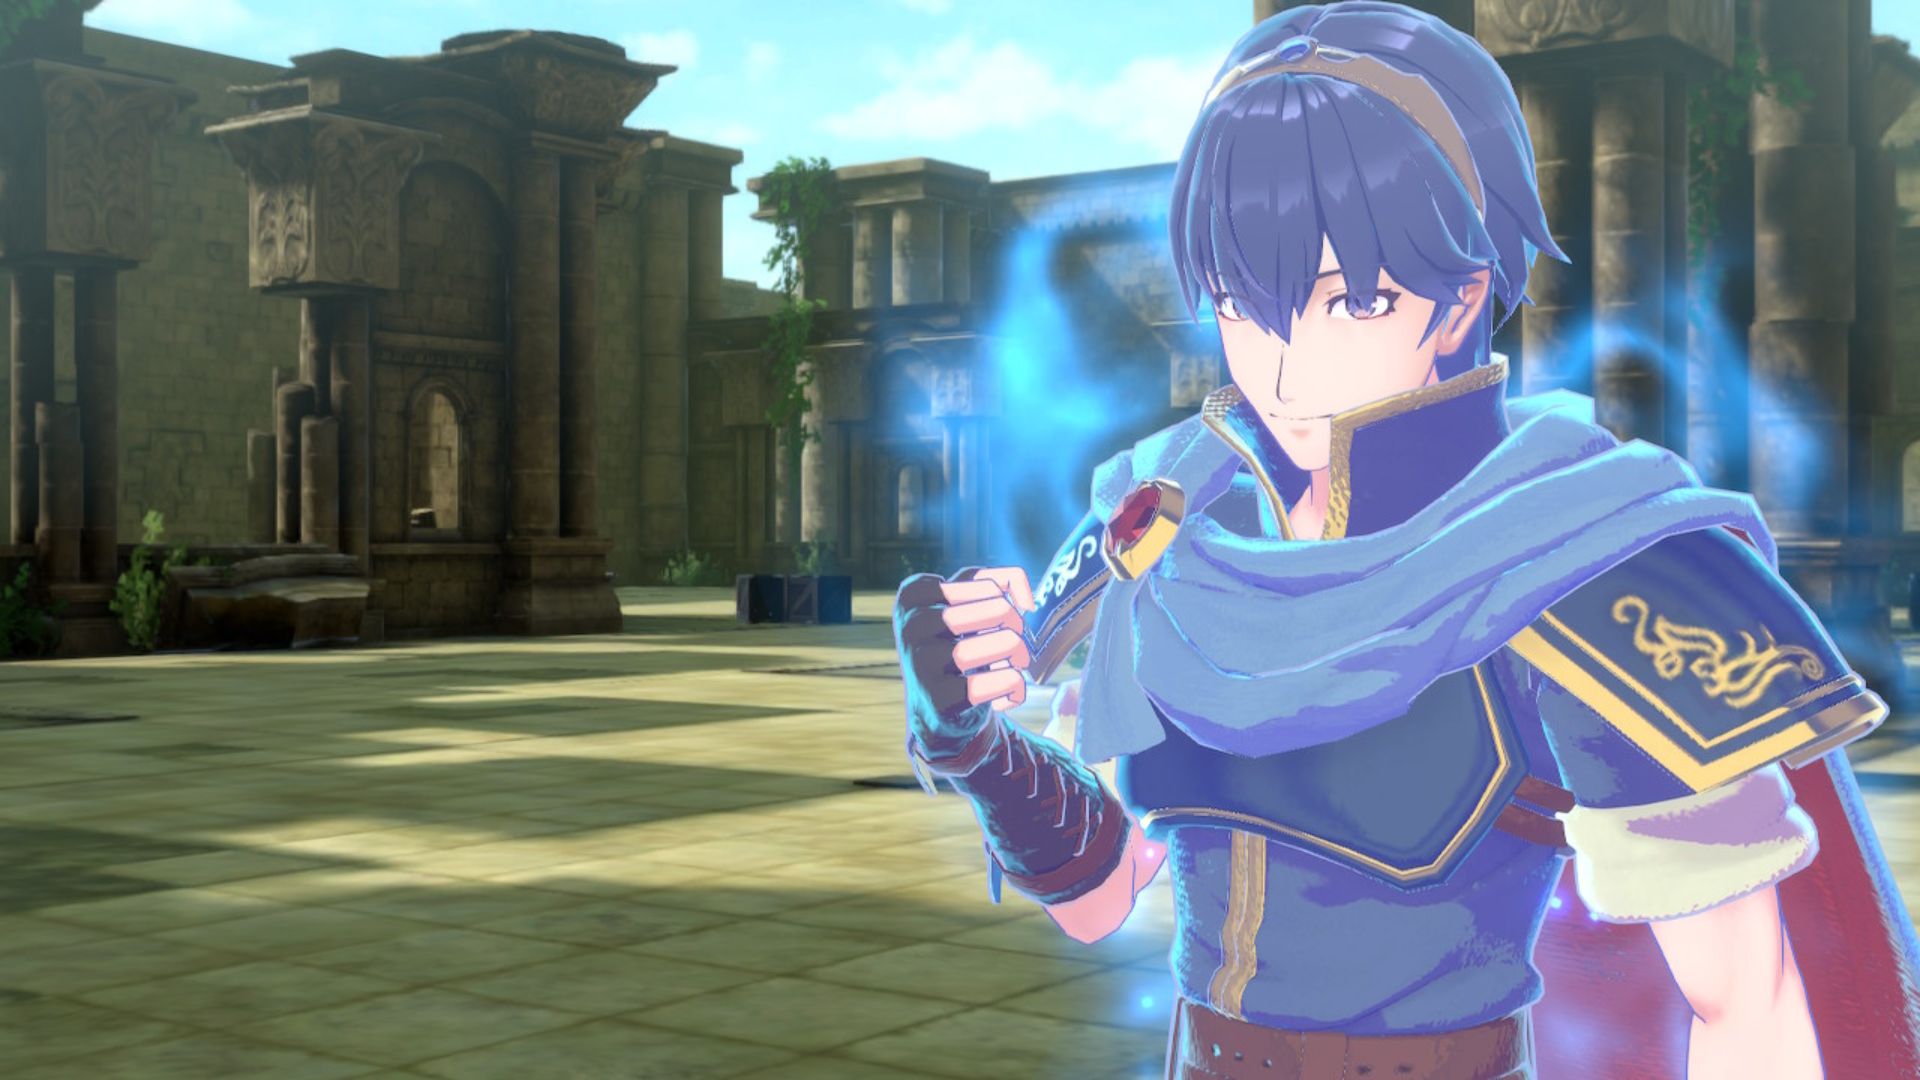 Fire Emblem Engage Paralogues: The character can be seen